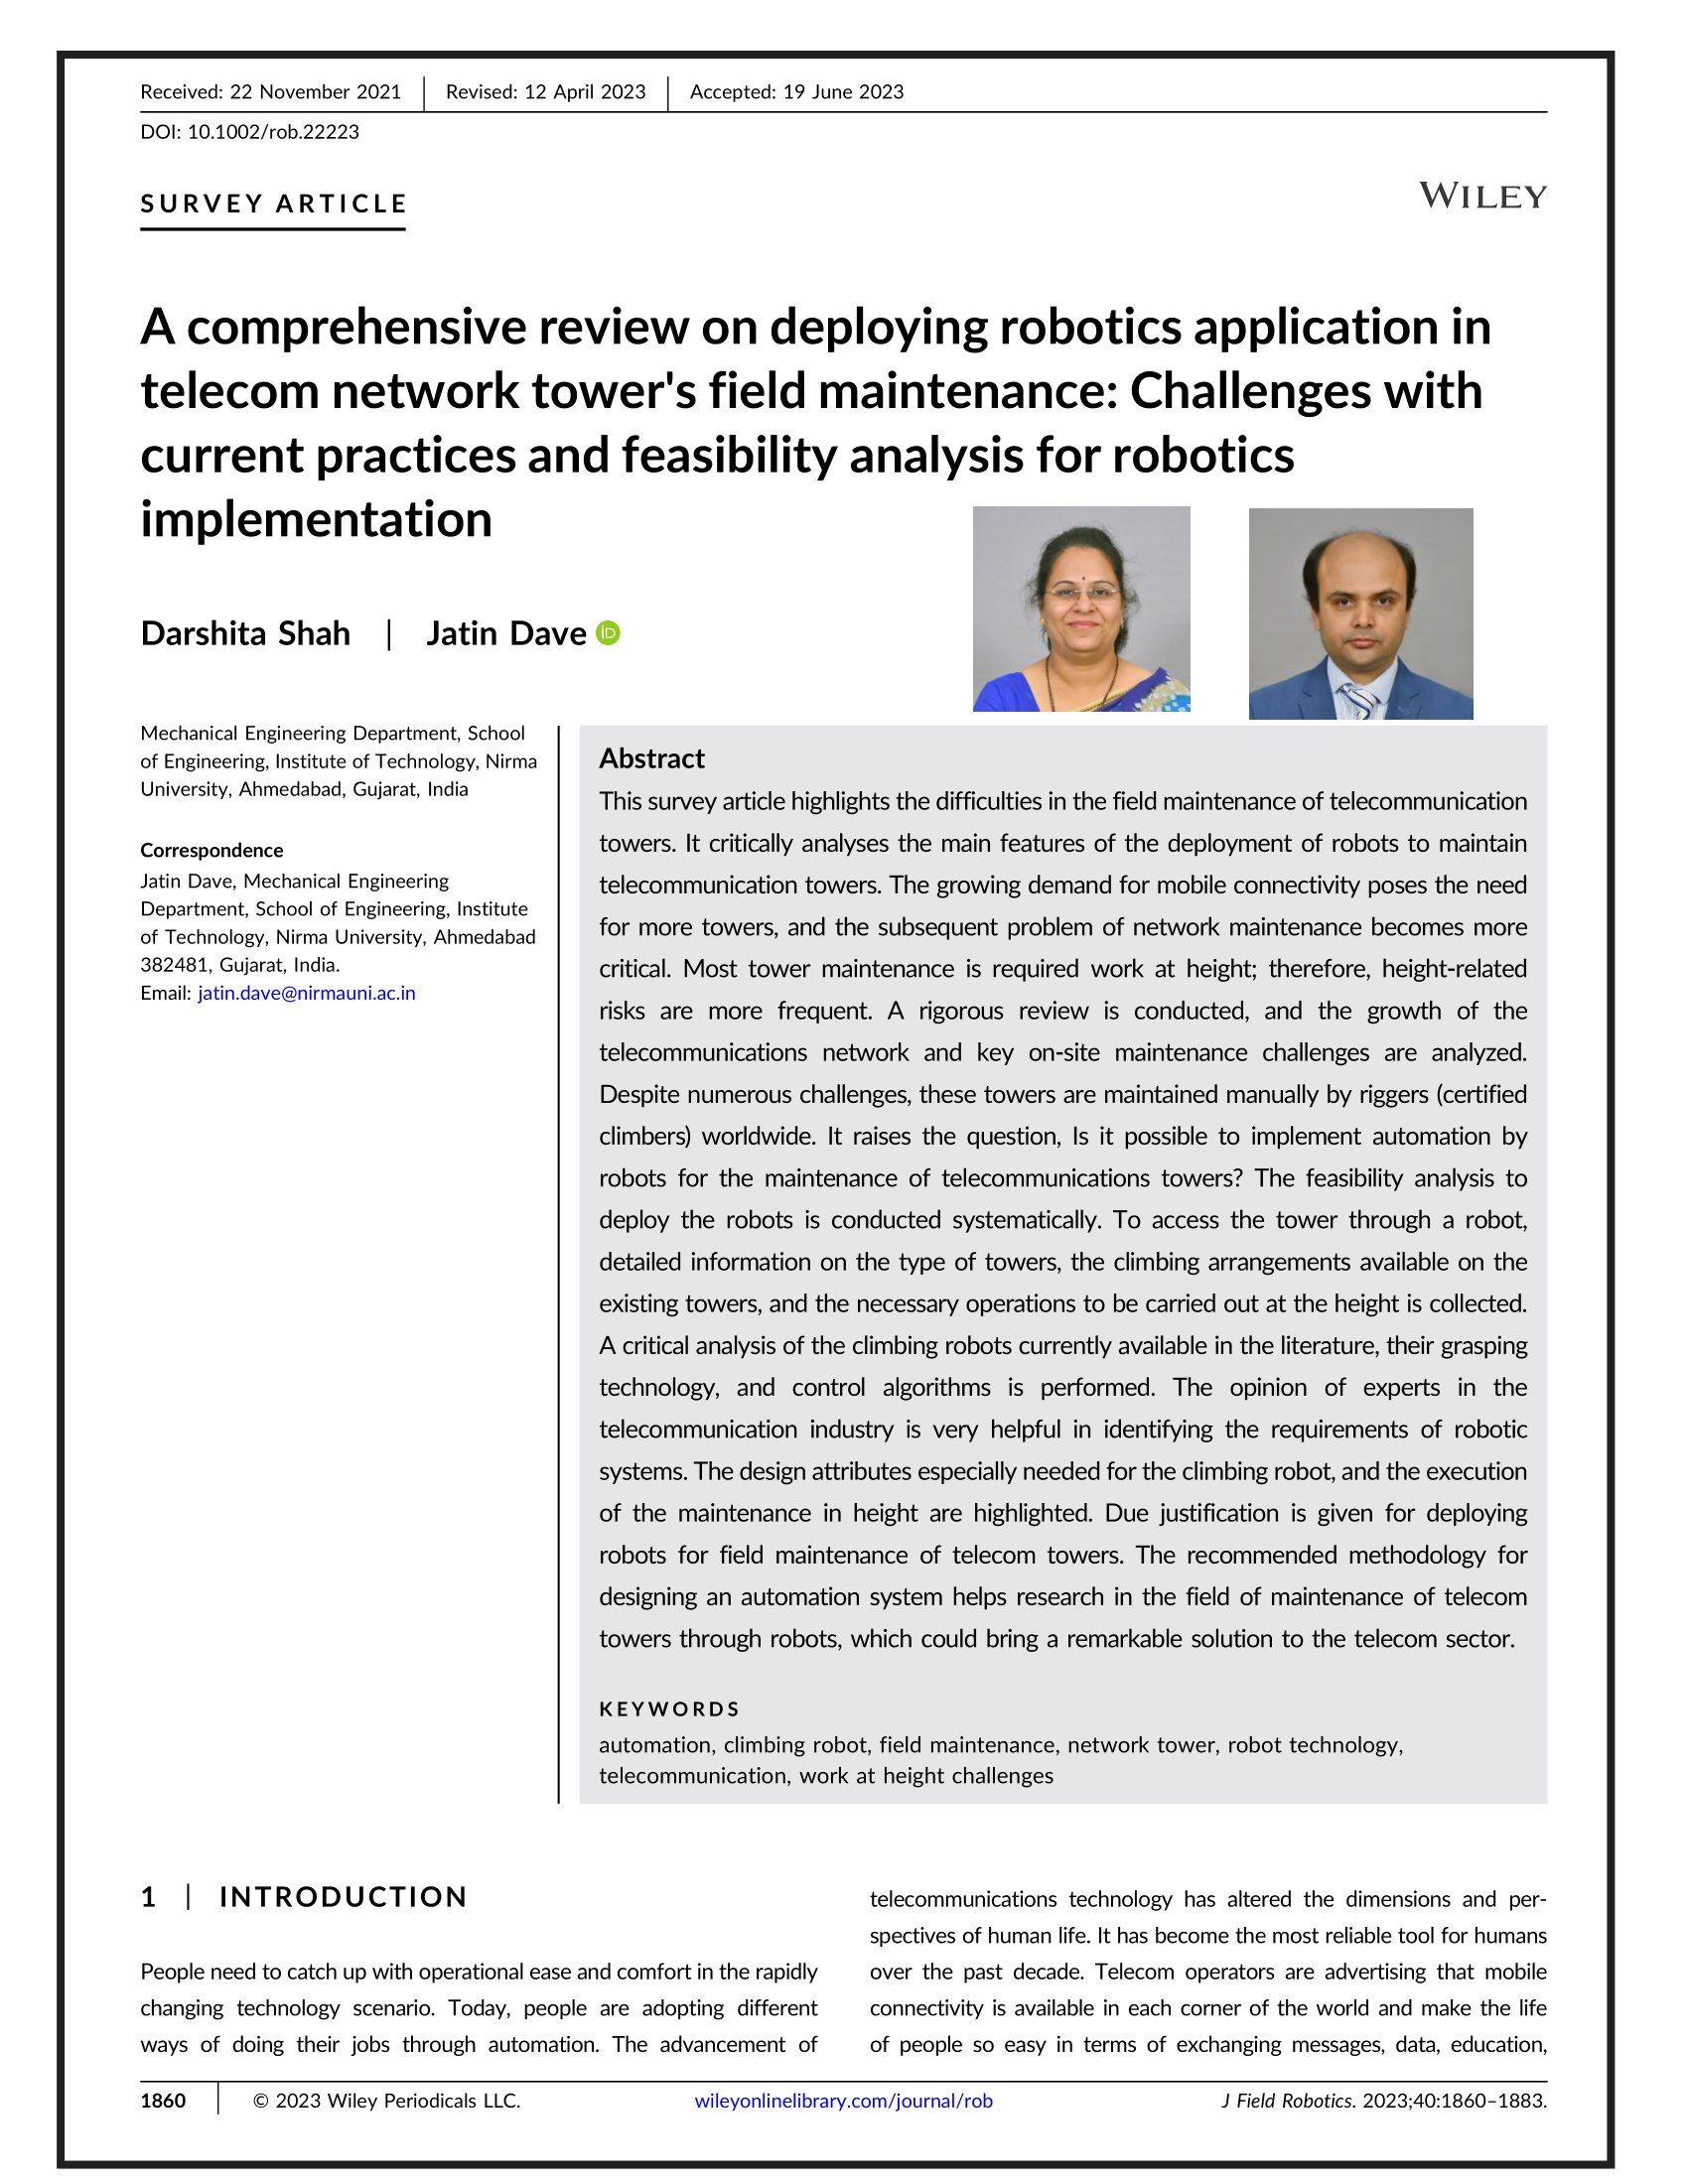 A comprehensive review on deploying robotics application in telecom network tower’s field maintenance: Challenges with current practices and feasibility analysis for robotics implementation